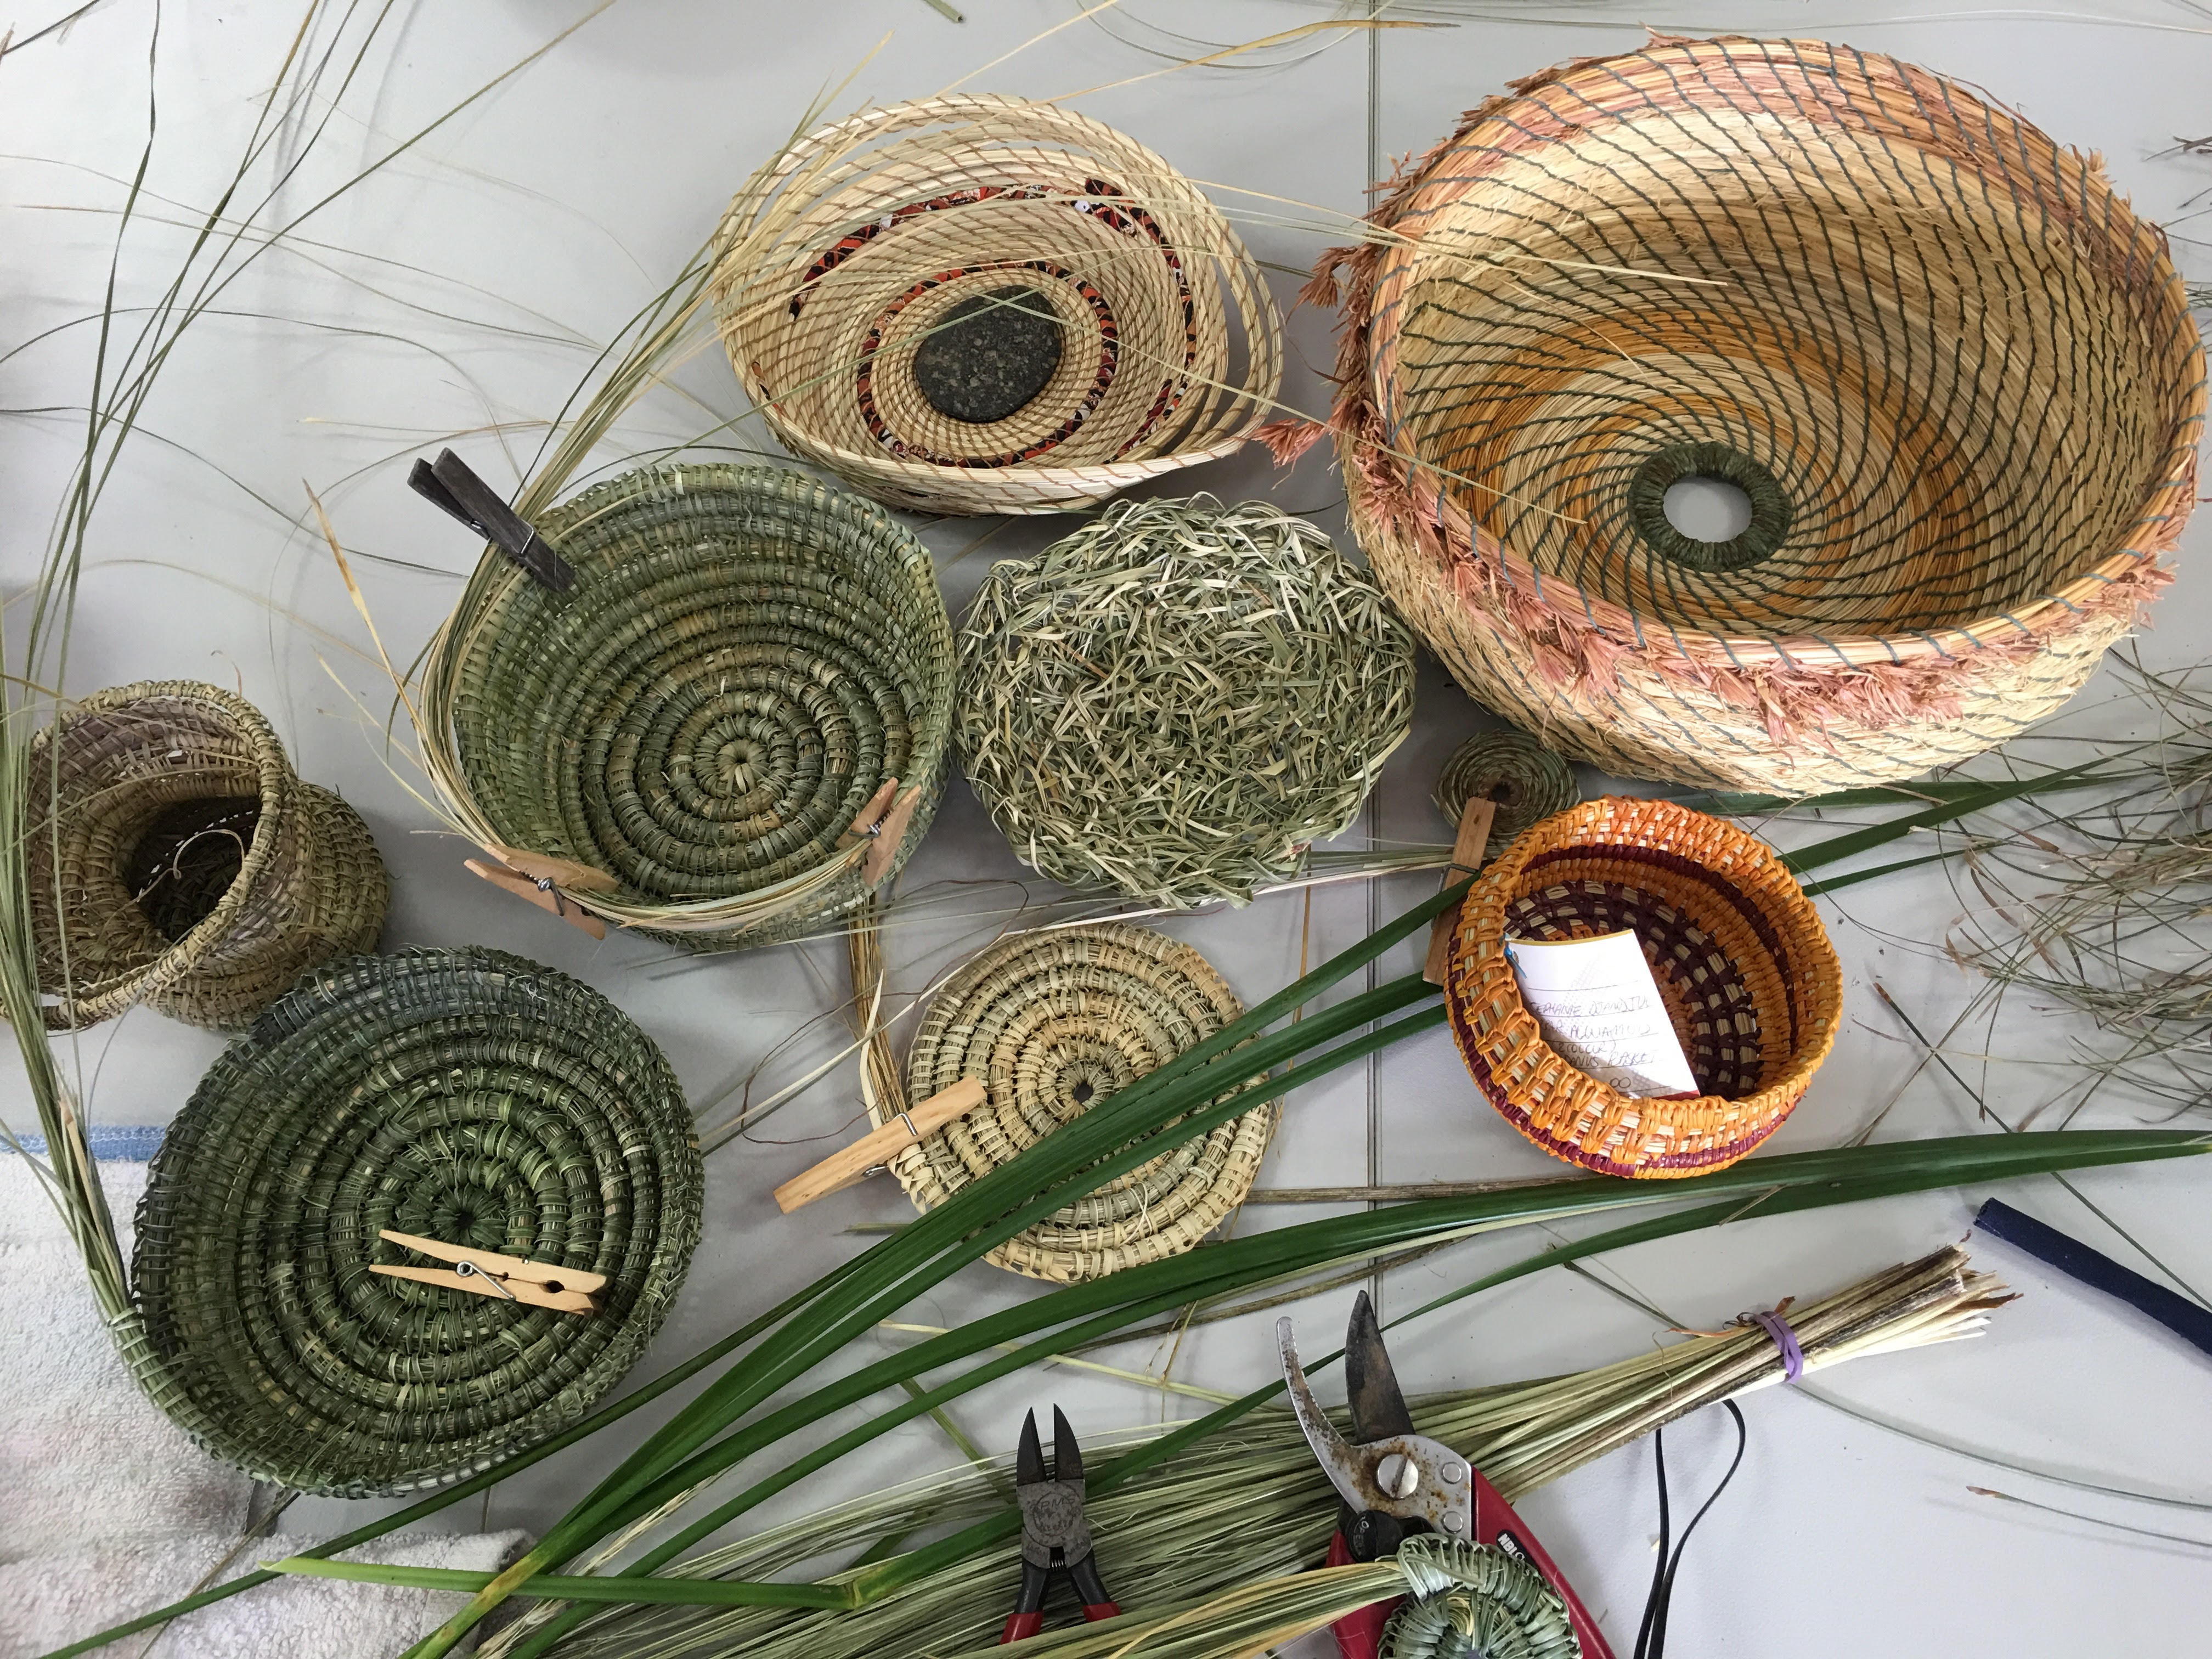 Stitch and coil baskets